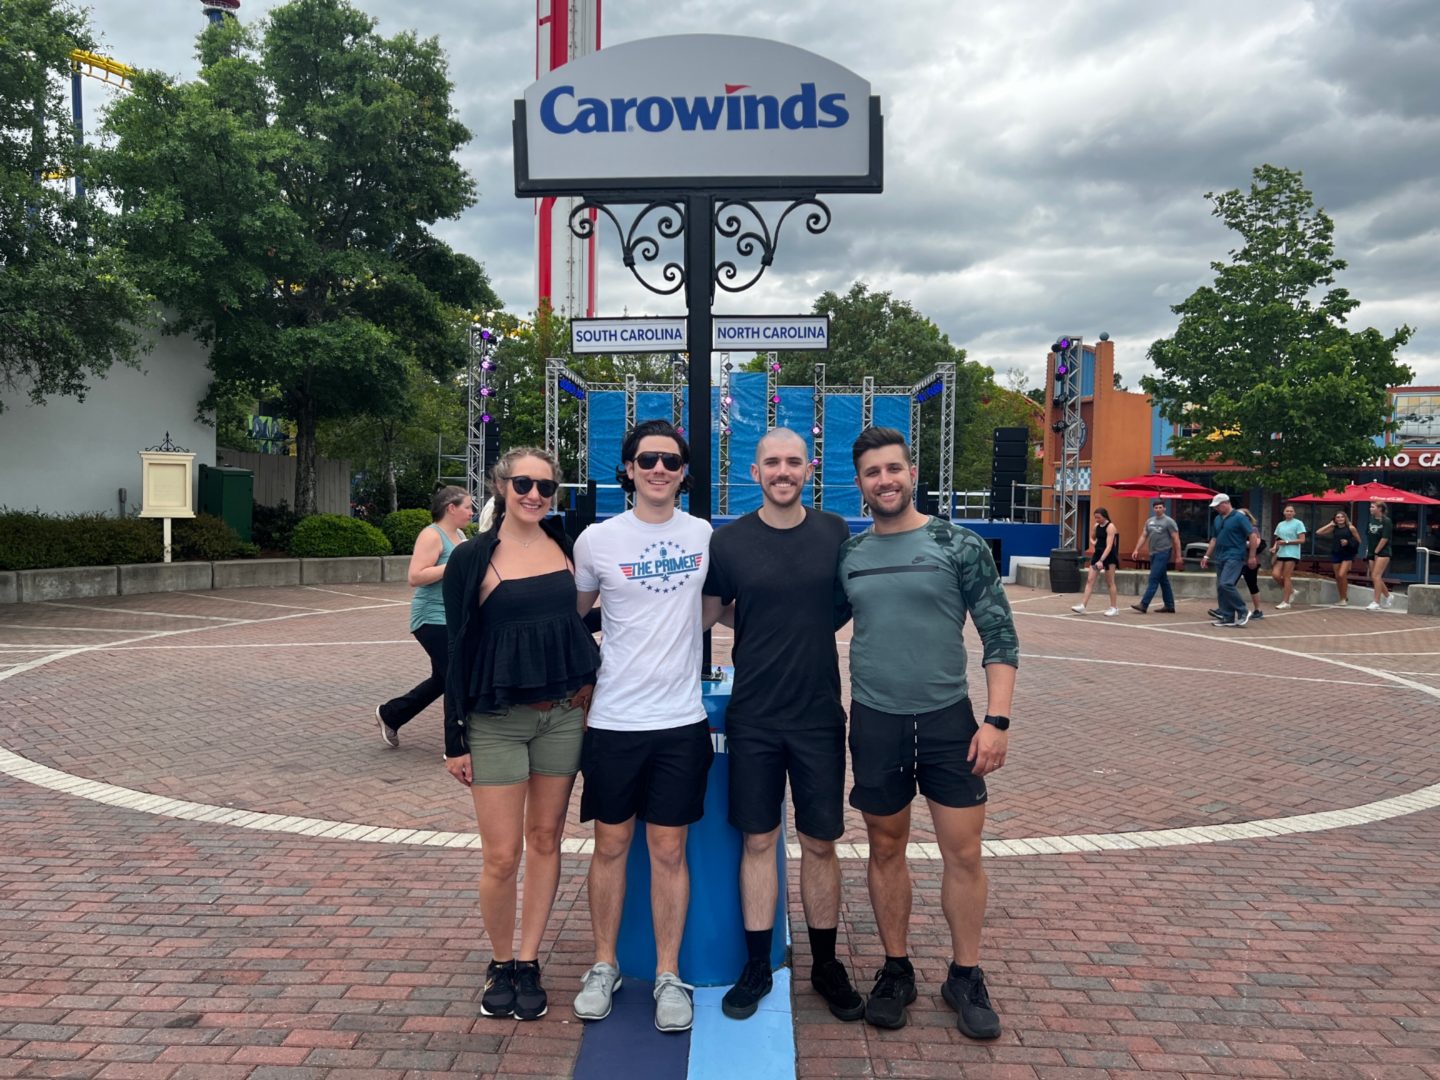 Spending the Day at Carowinds Amusement Park